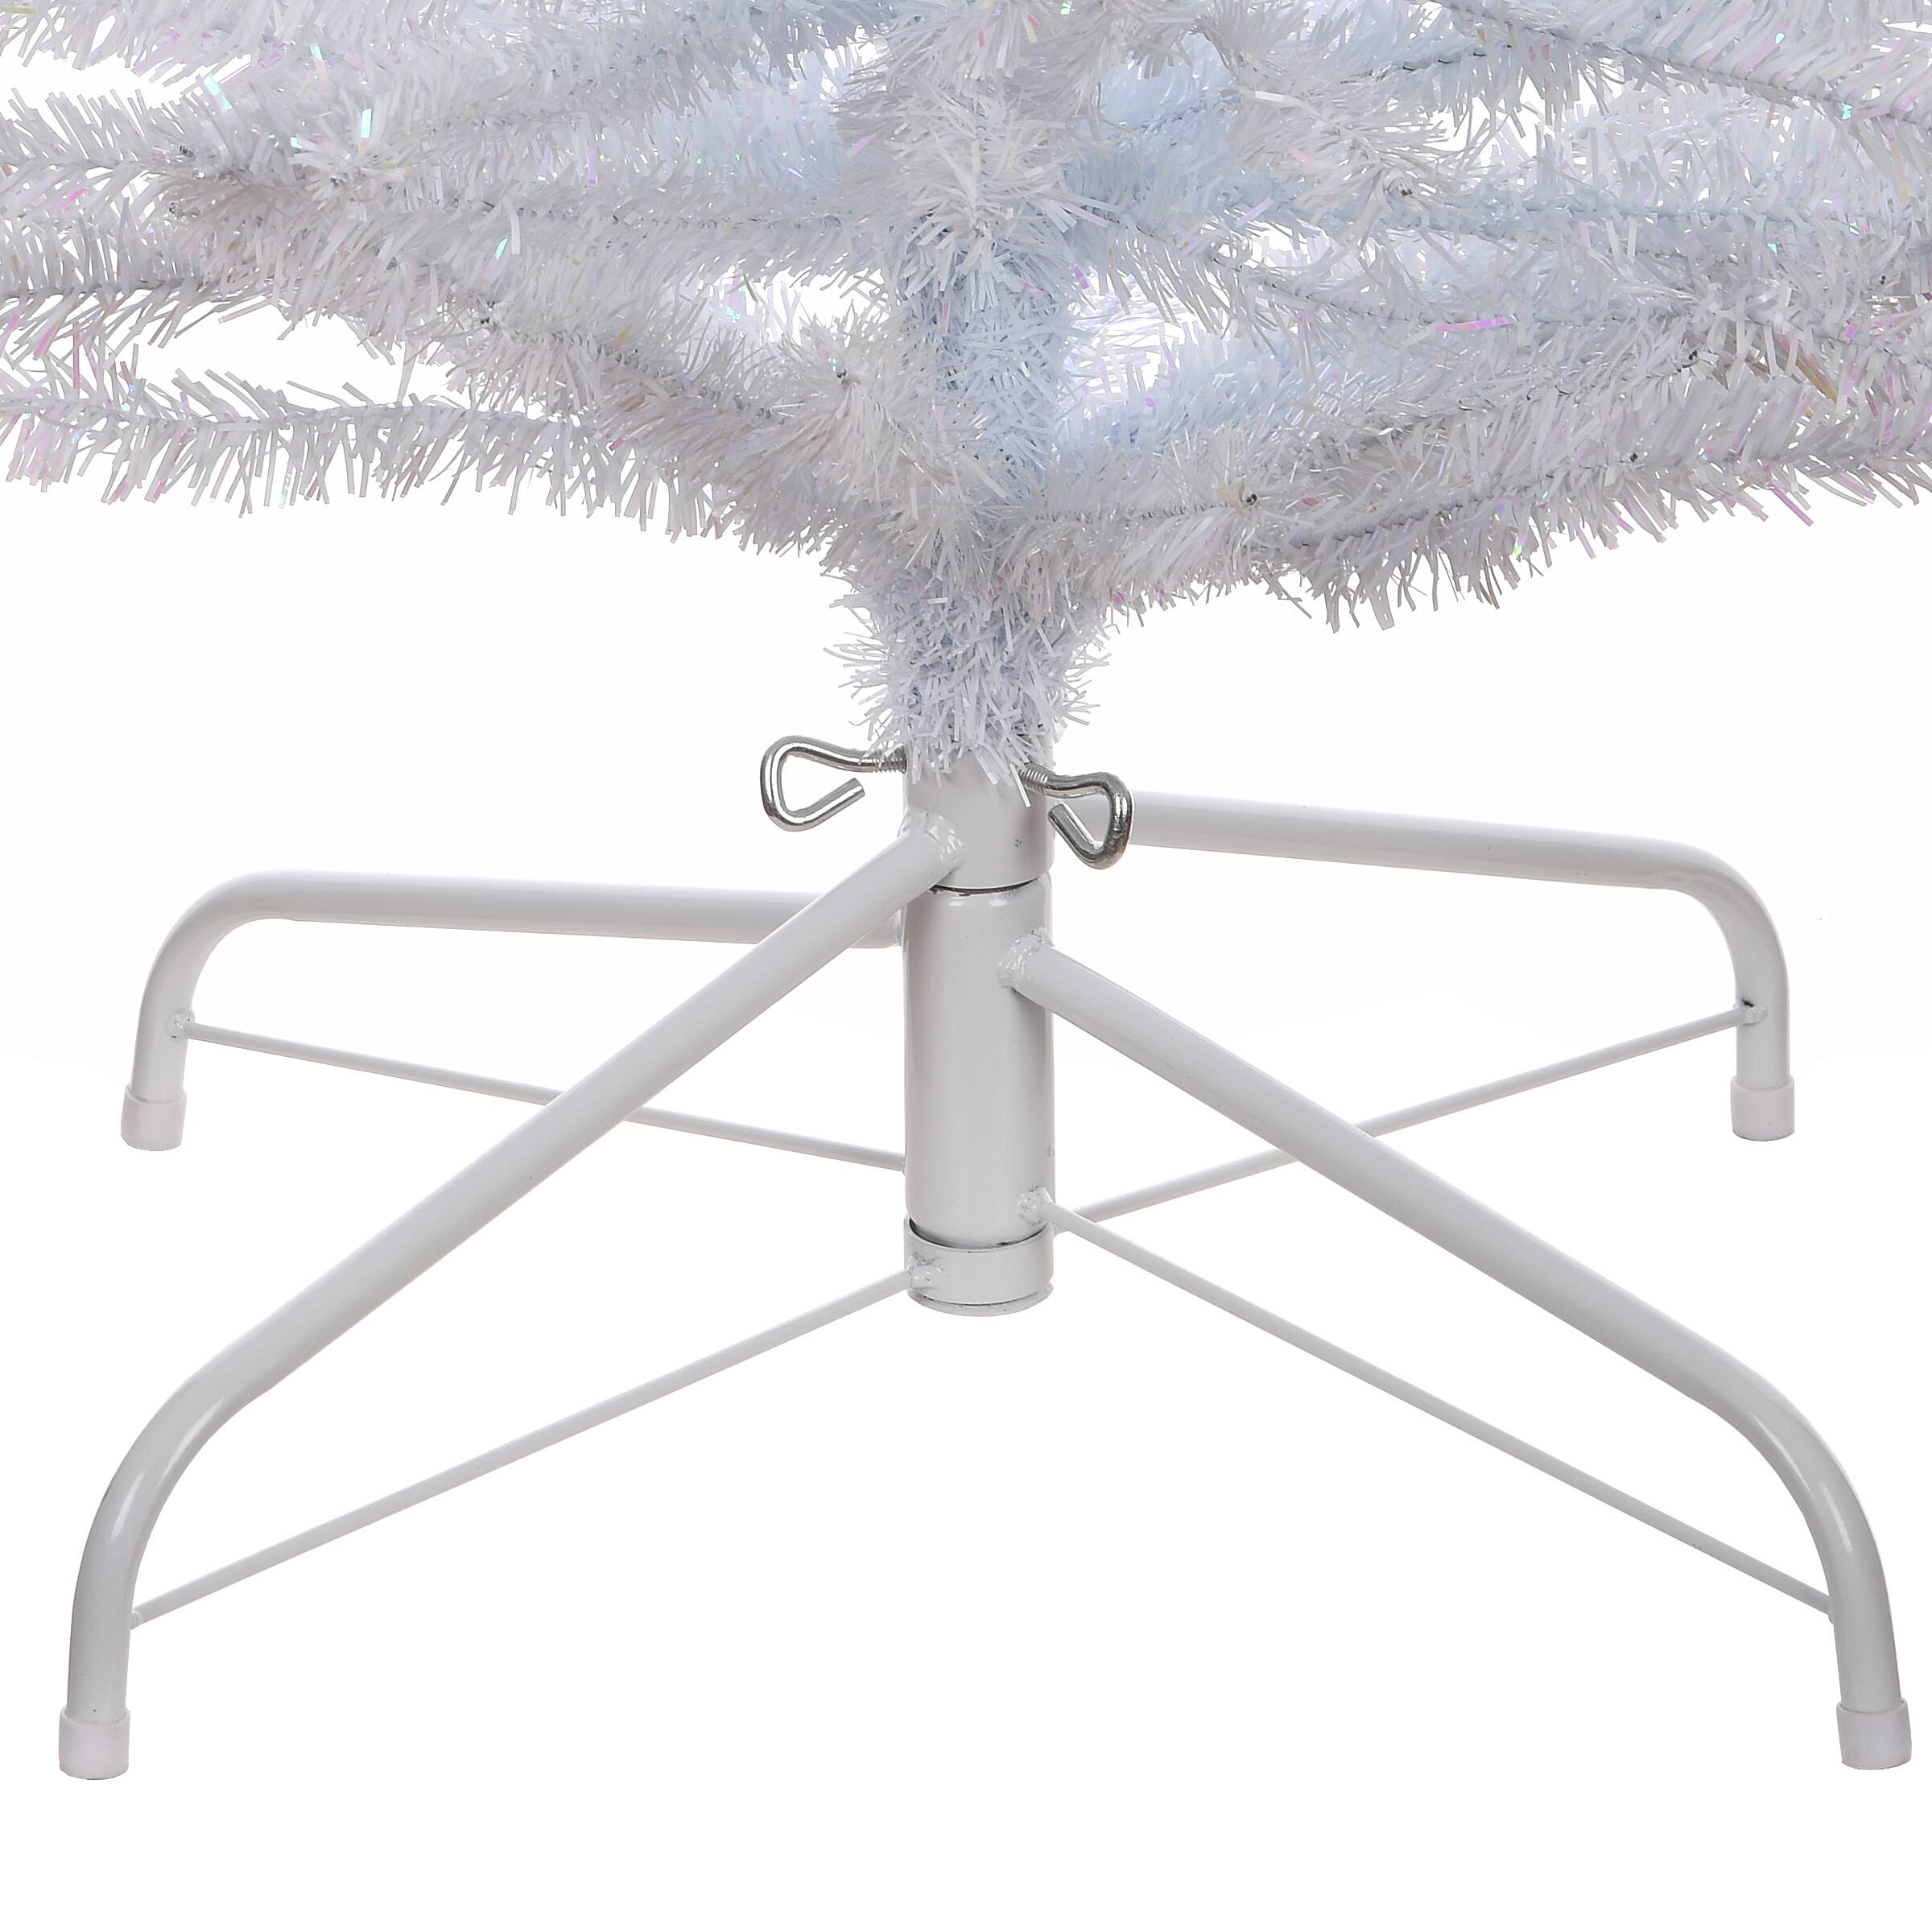 7ft. Unlit Tinsel Artificial Christmas Tree